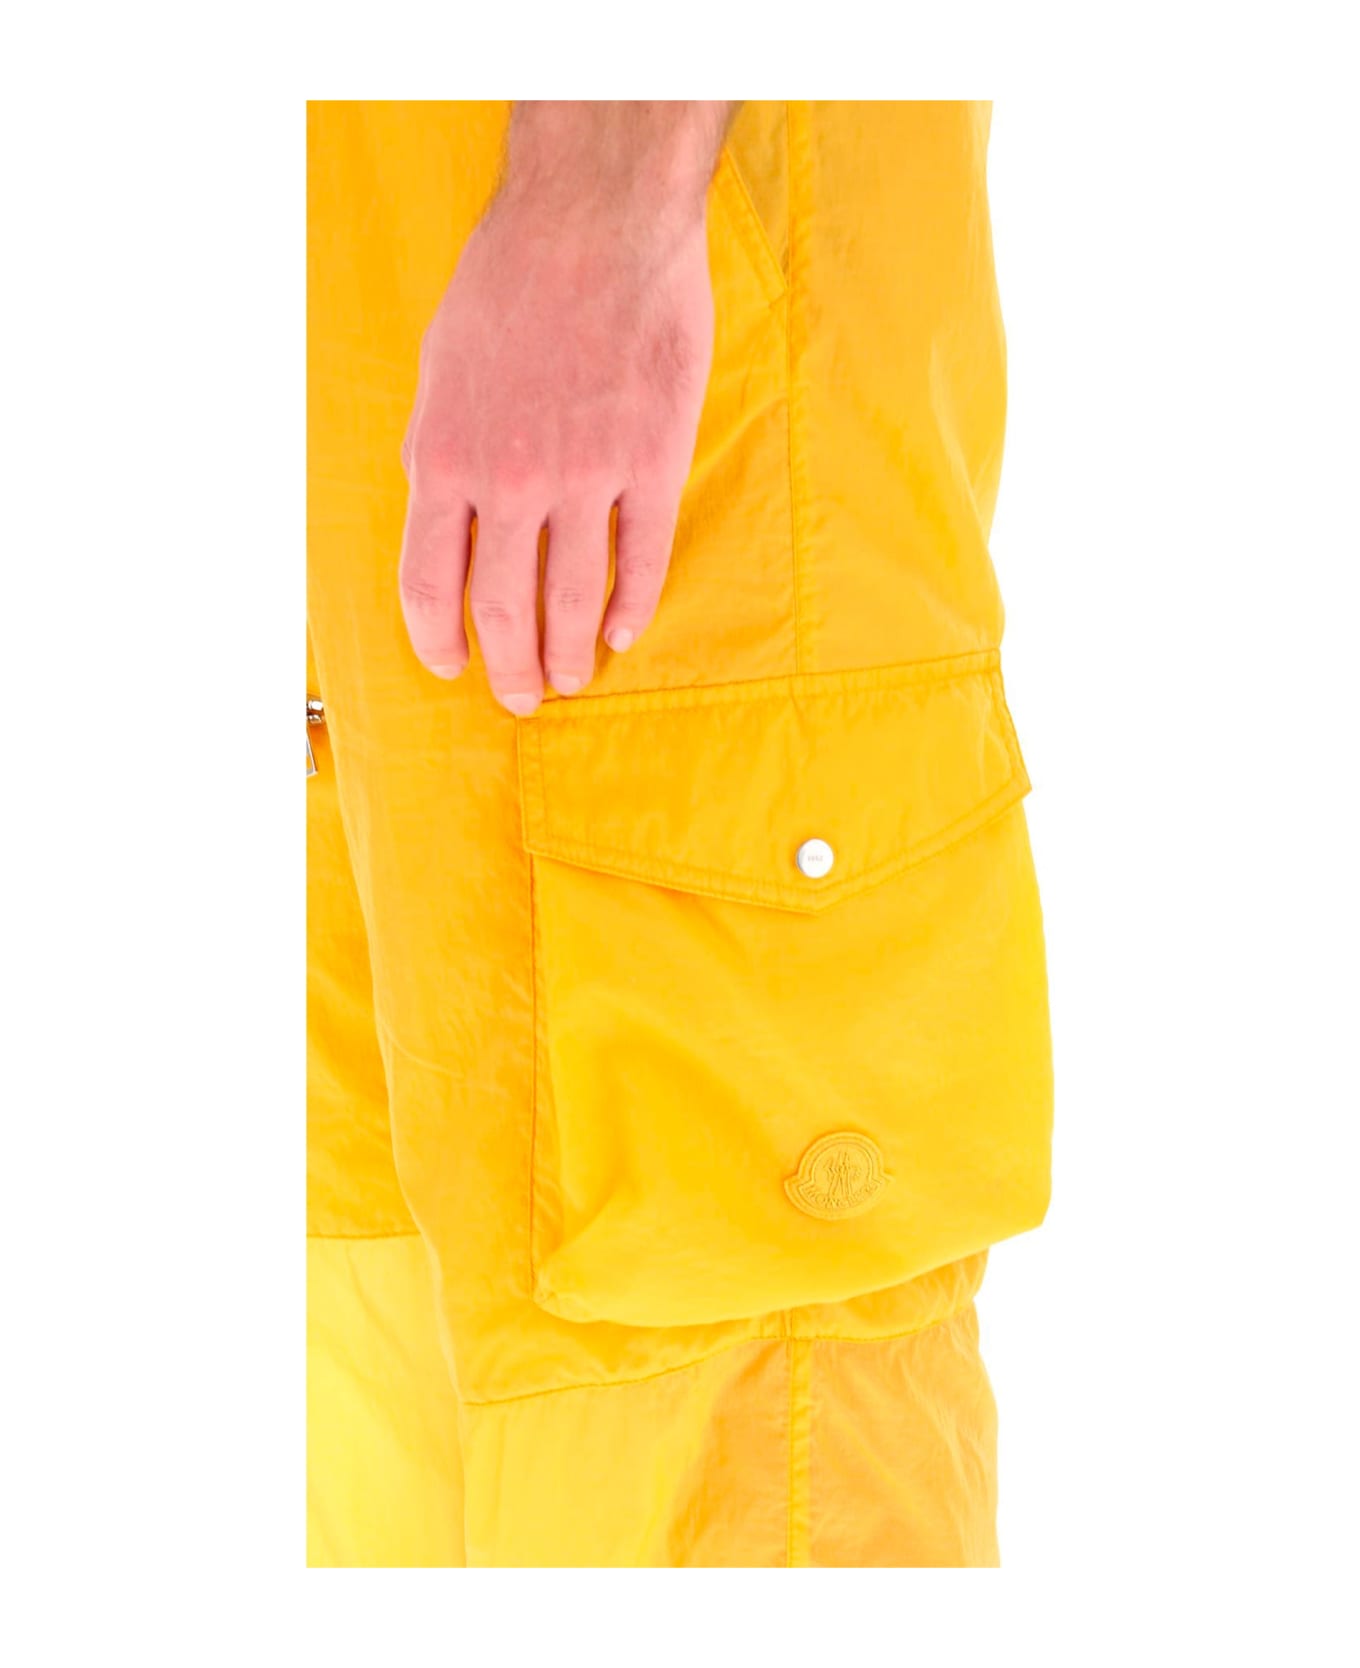 Moncler Genius Genius Hot Lightweight Cady Trousers - Yellow ボトムス